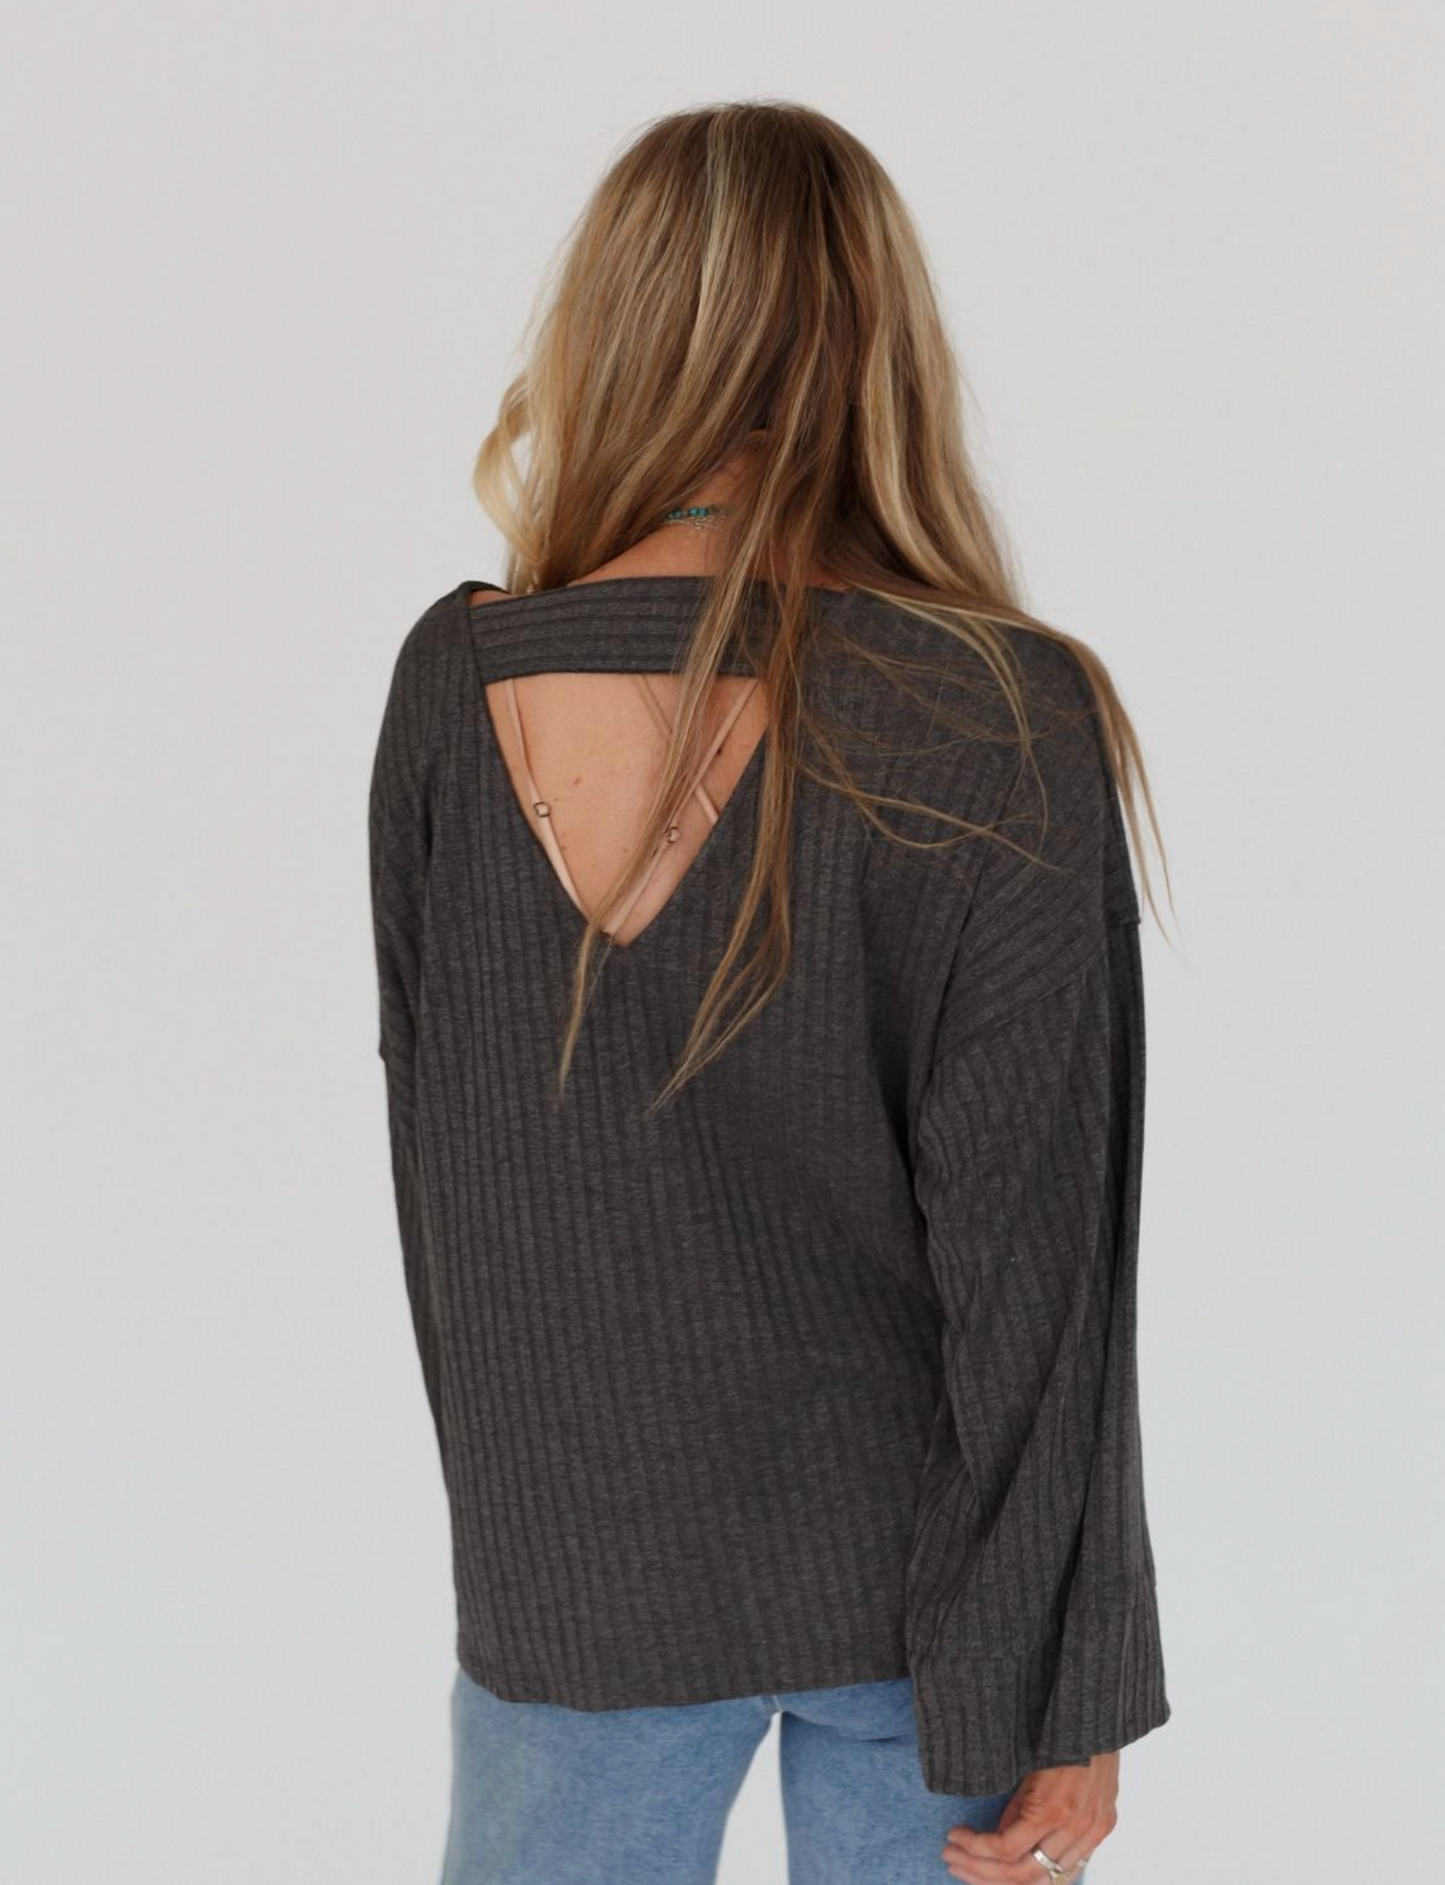 Round Neckline Sweater Top in Heather Charcoal - The Street Boutique 